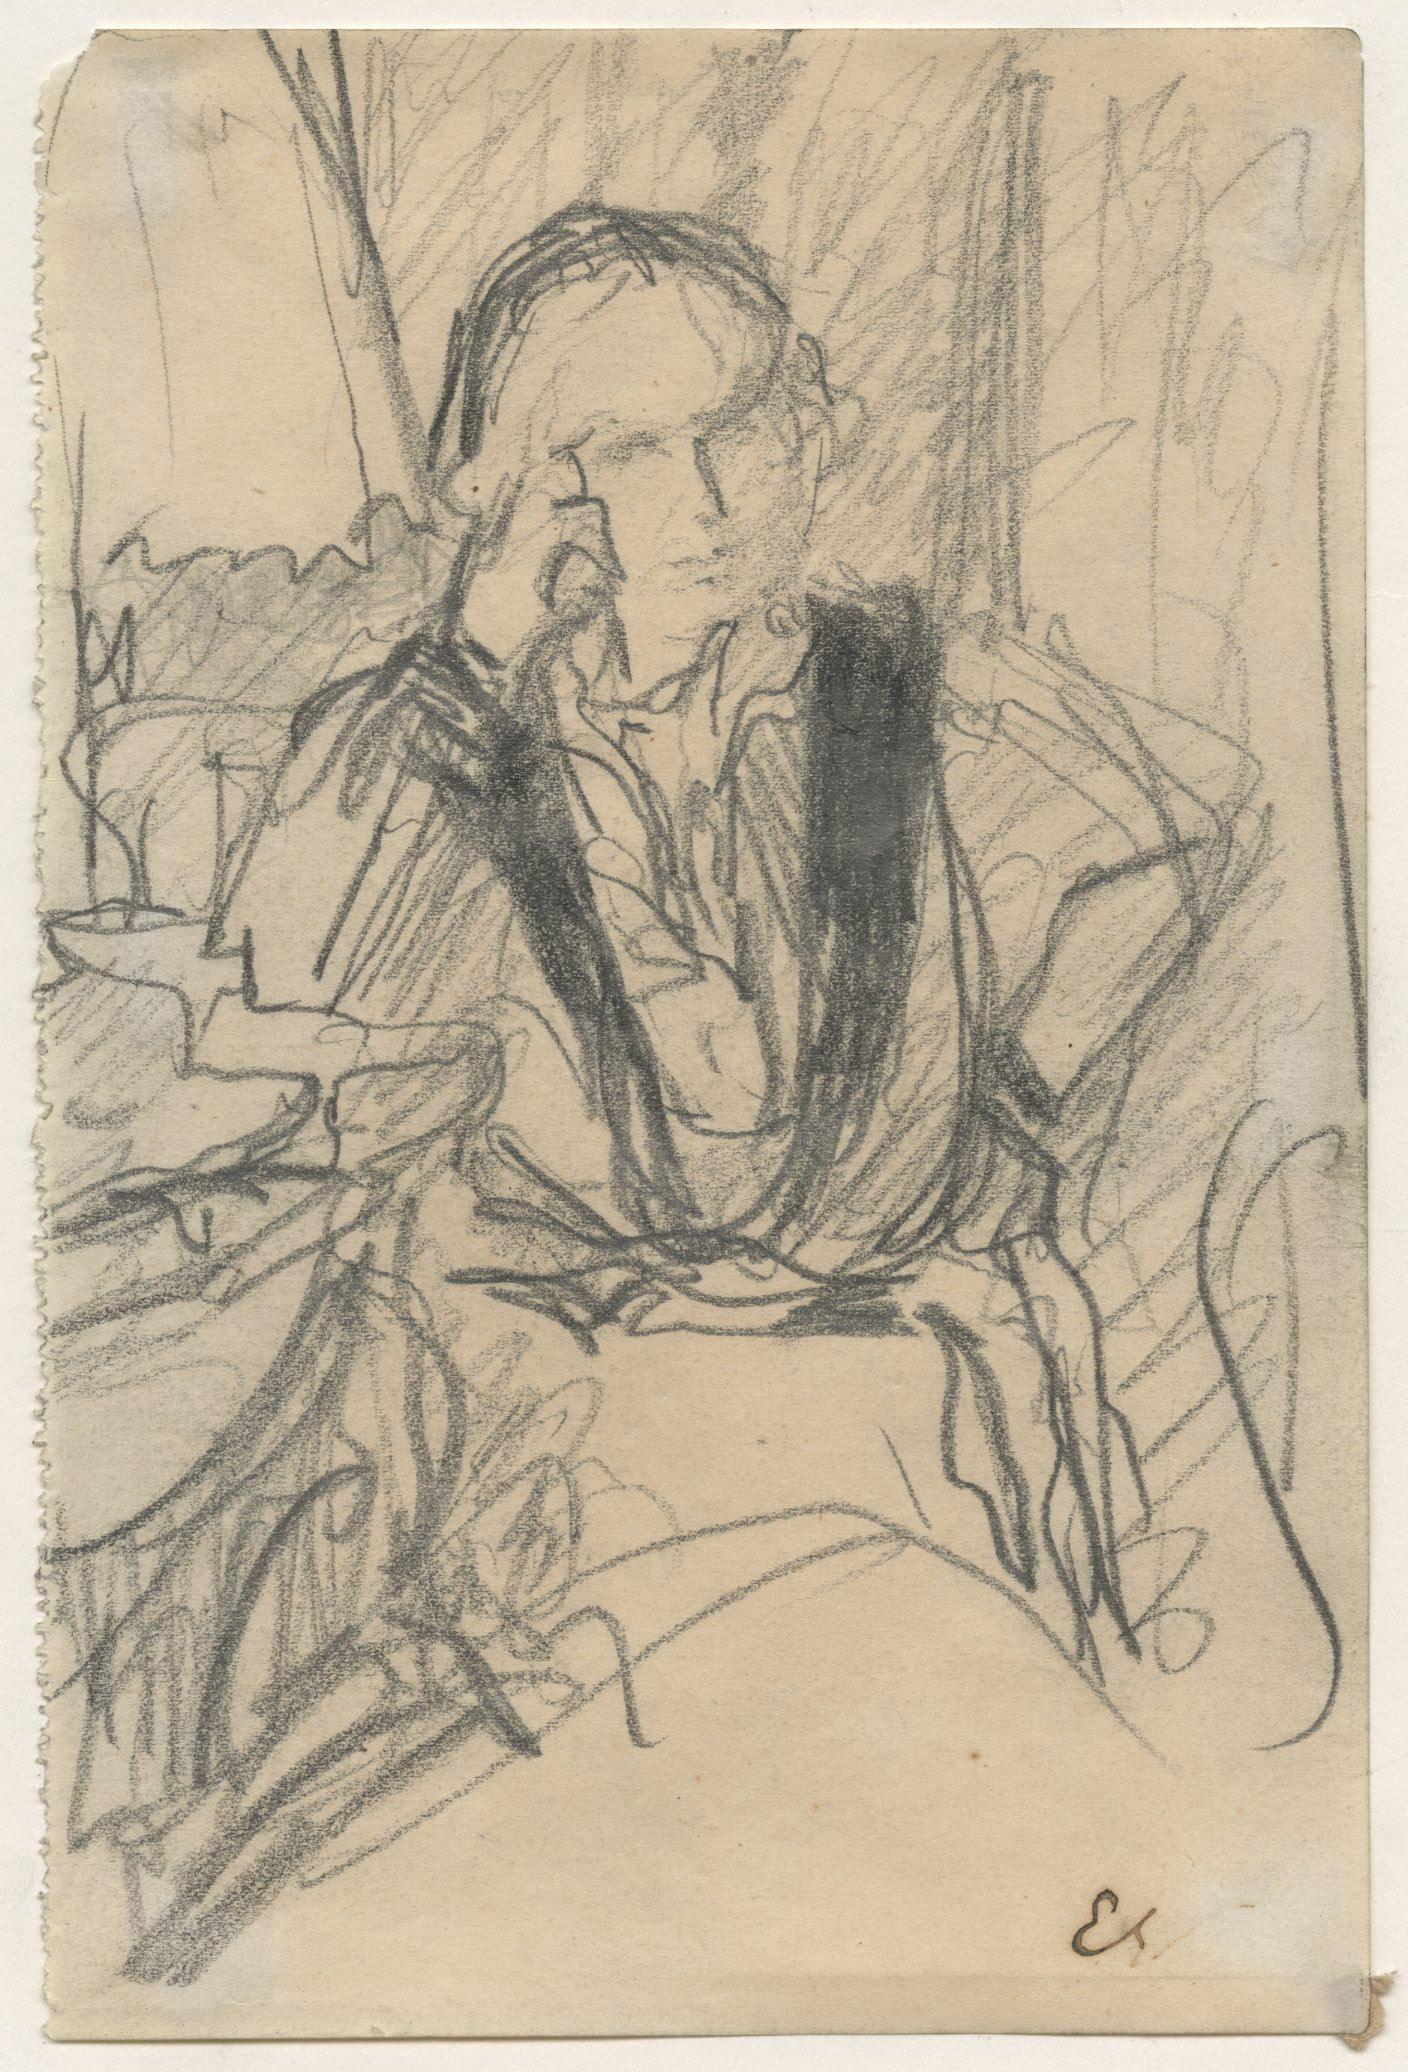 Study of Lucie (Ralph) Belin seated in an interior